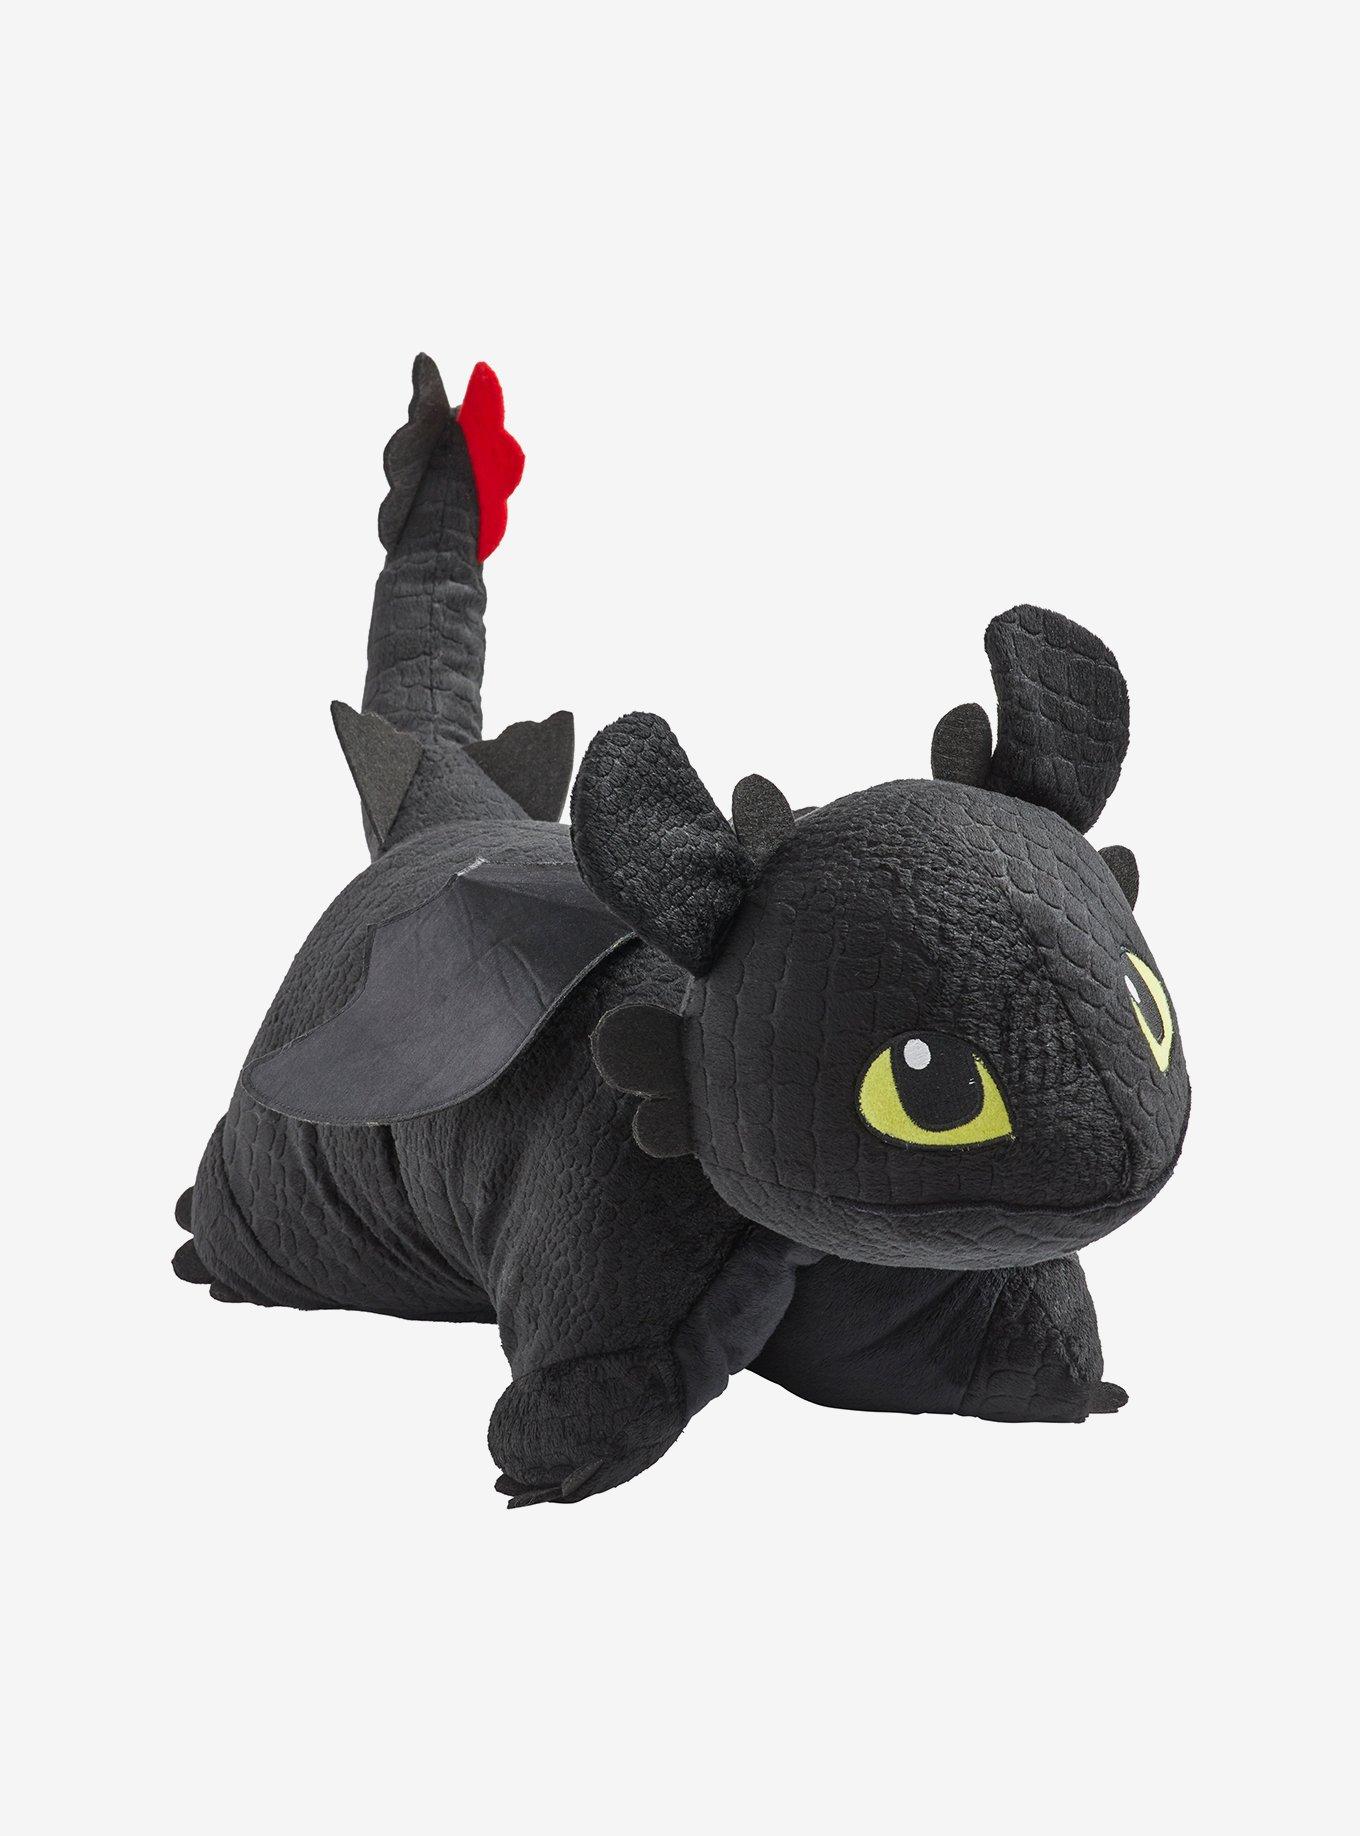 how to train your dragon toy